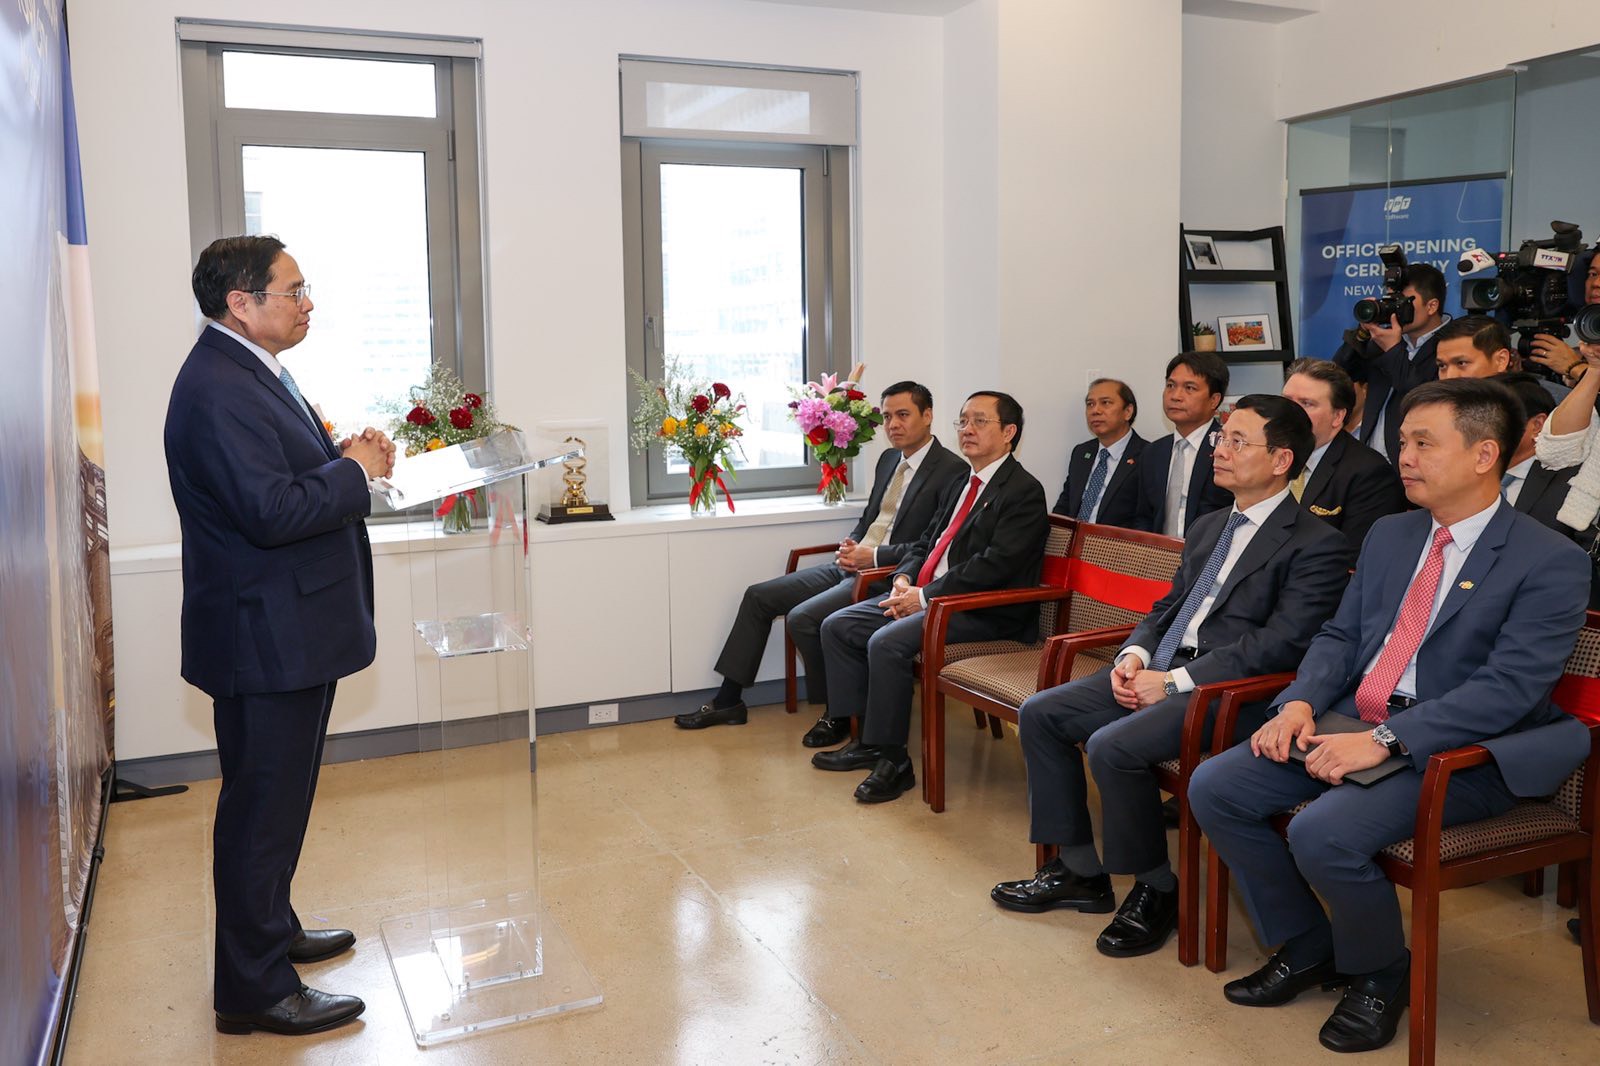 Prime Minister Pham Minh Chinh attended the opening ceremony of FPT Software Office in New York, USA - Photo 3.